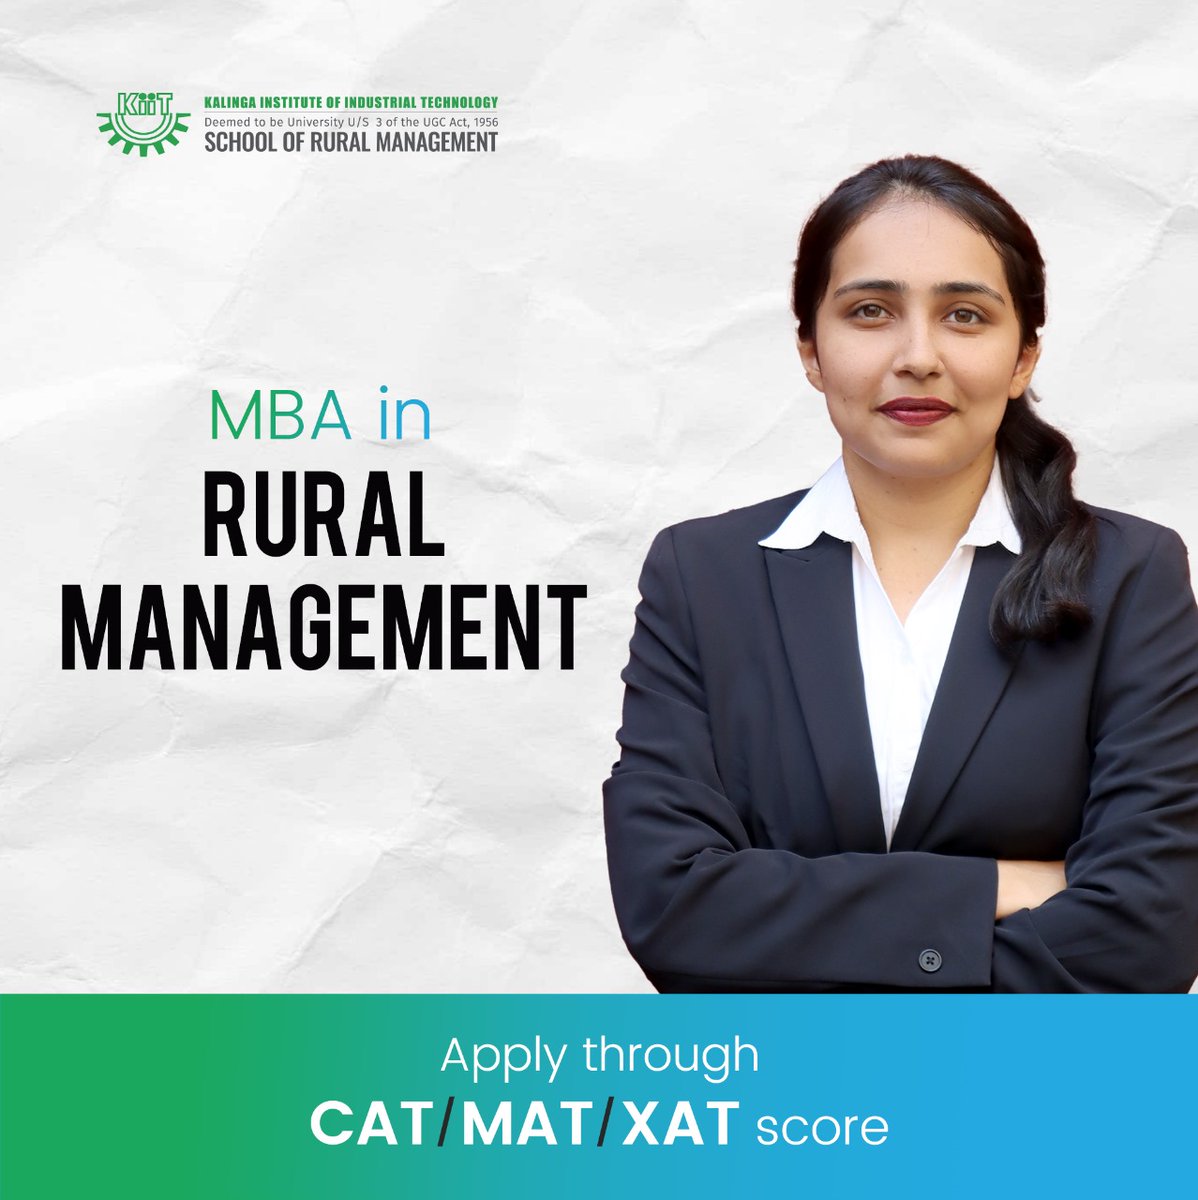 Admission is now Open for KSRM's MBA in Rural Management Programme.

Apply through - ksrm.ac.in/mba

#ksrmbbsr #RuralManagement #kiitmba #AdmissionOpen